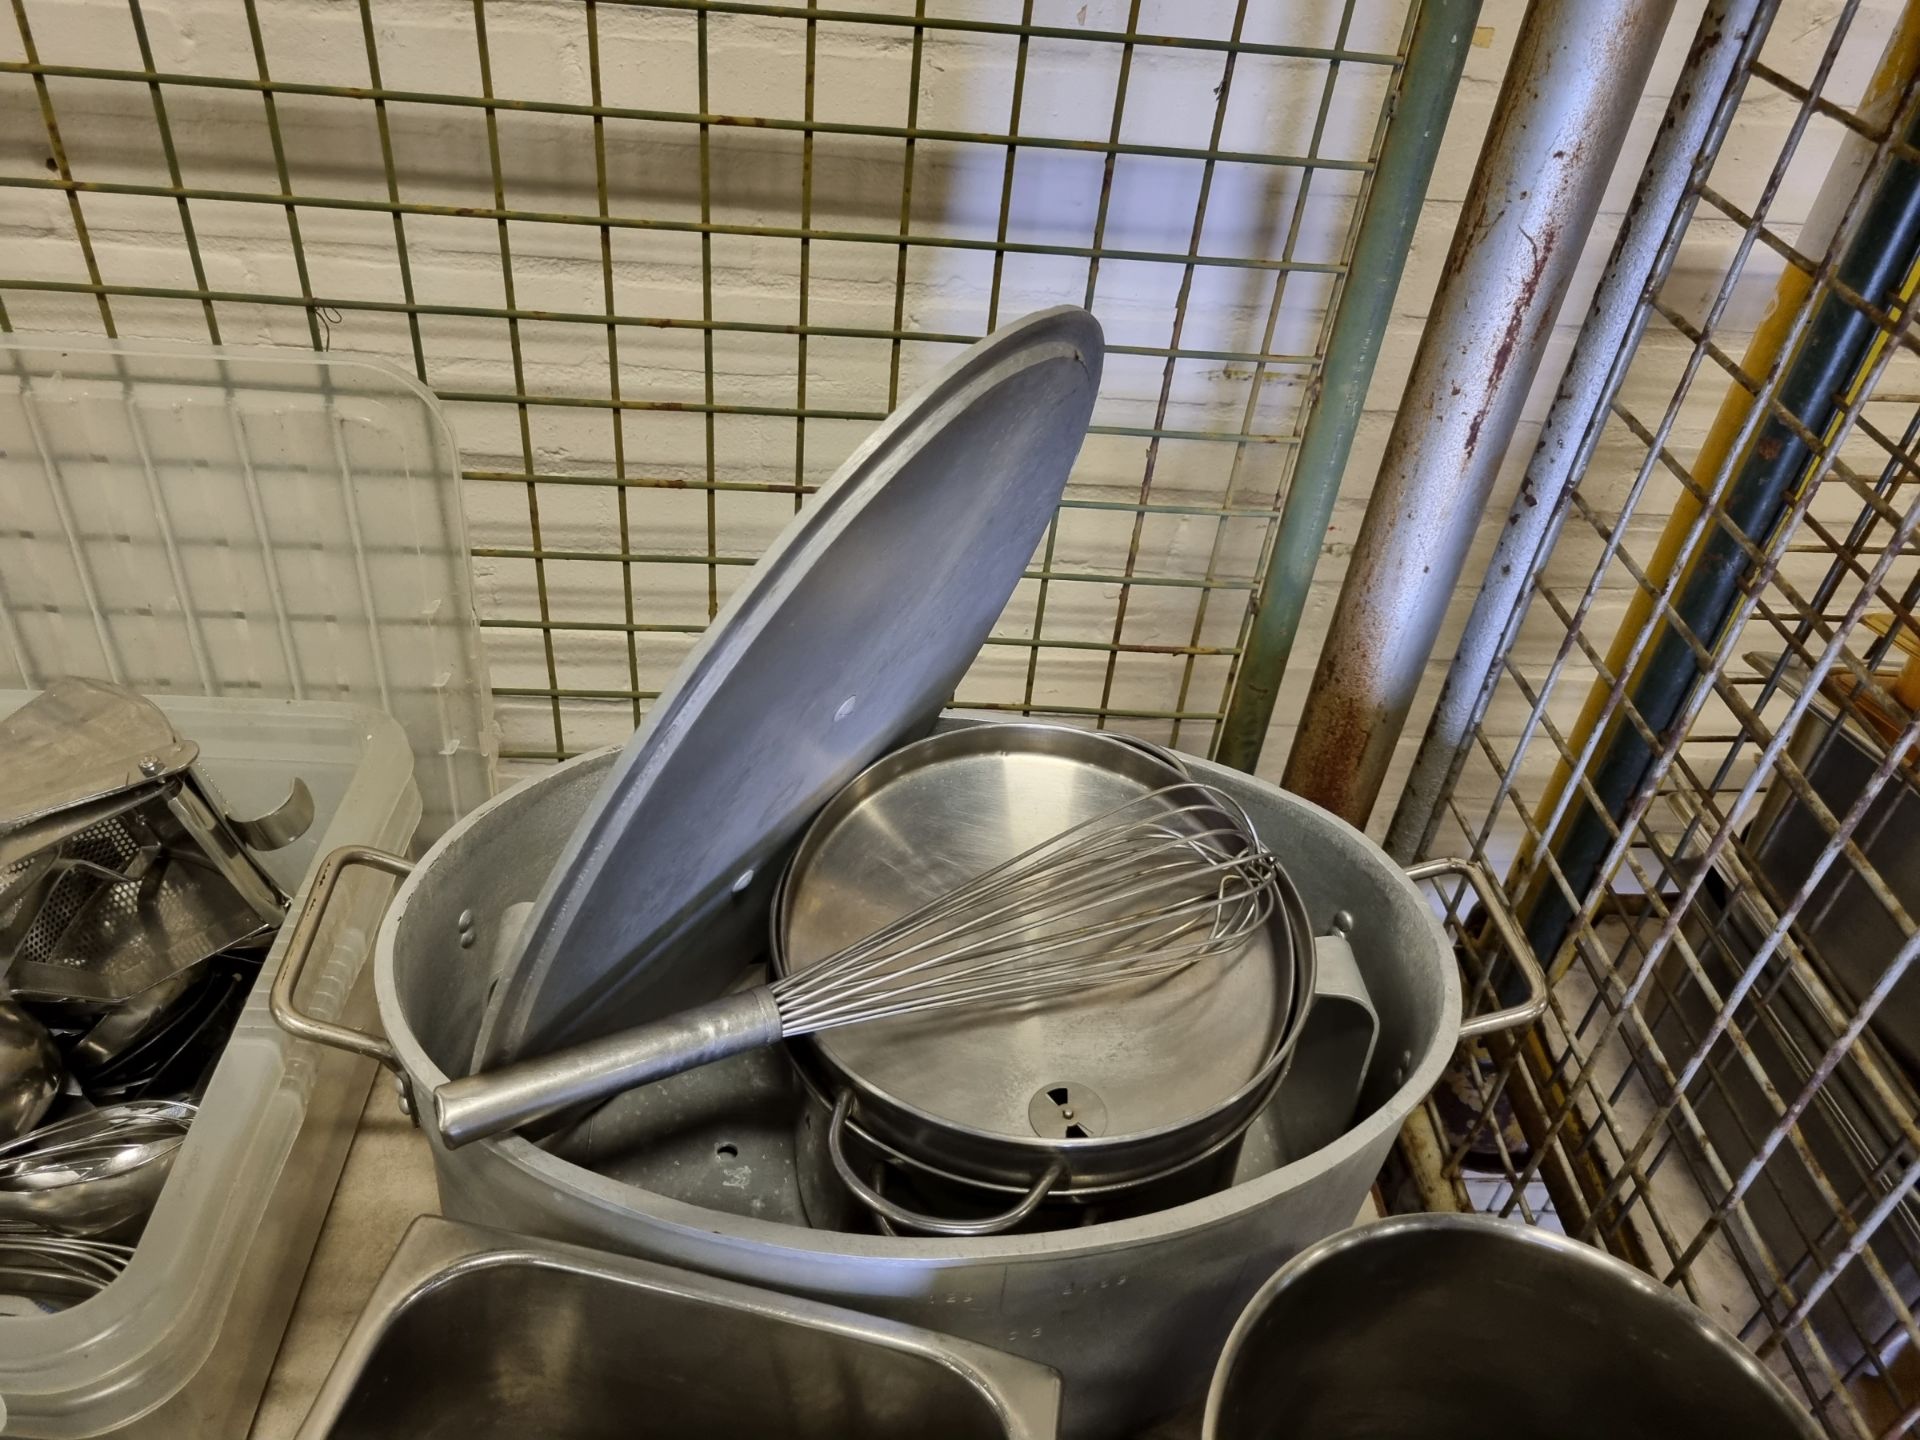 Catering equipment - pans, oven trays, mixing bowls, jugs, date stickers, frying pans and utensils - Image 5 of 6